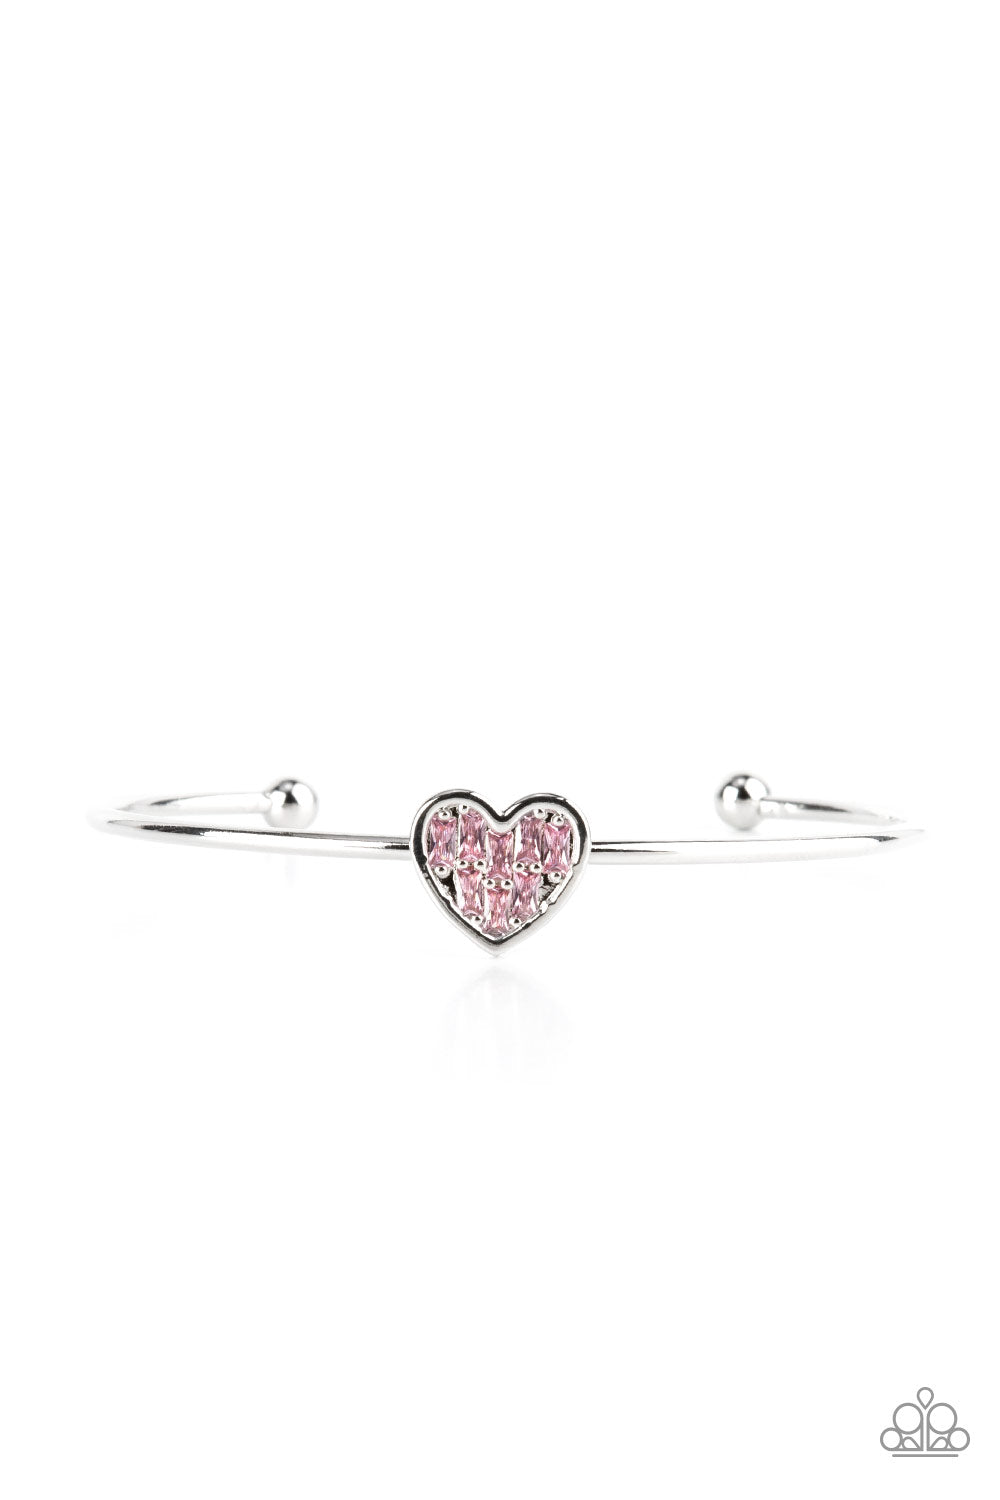 Paparazzi Accessories Heart of Ice - Pink